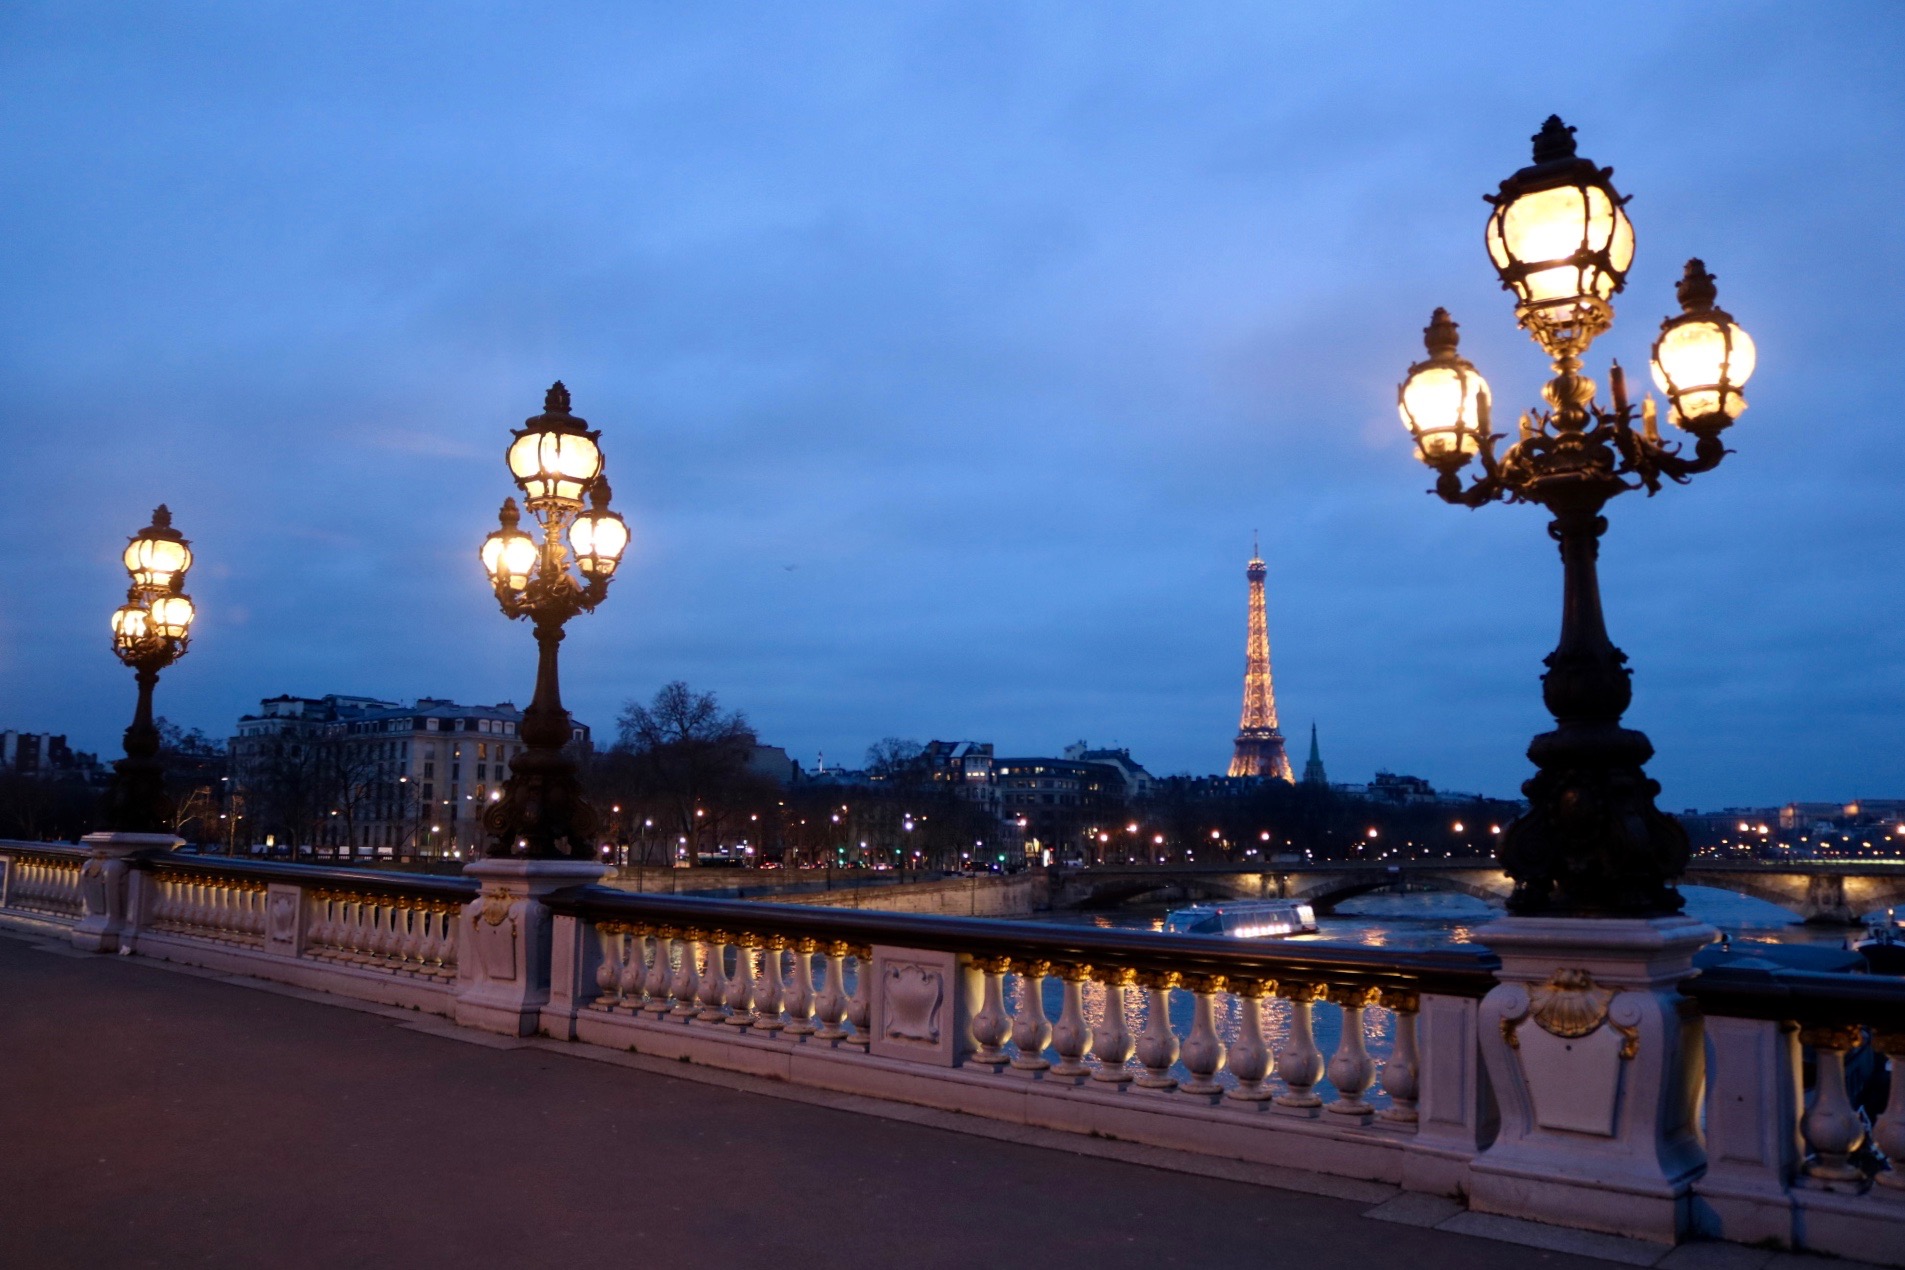 Embracing Winter - Love in the City of Lights